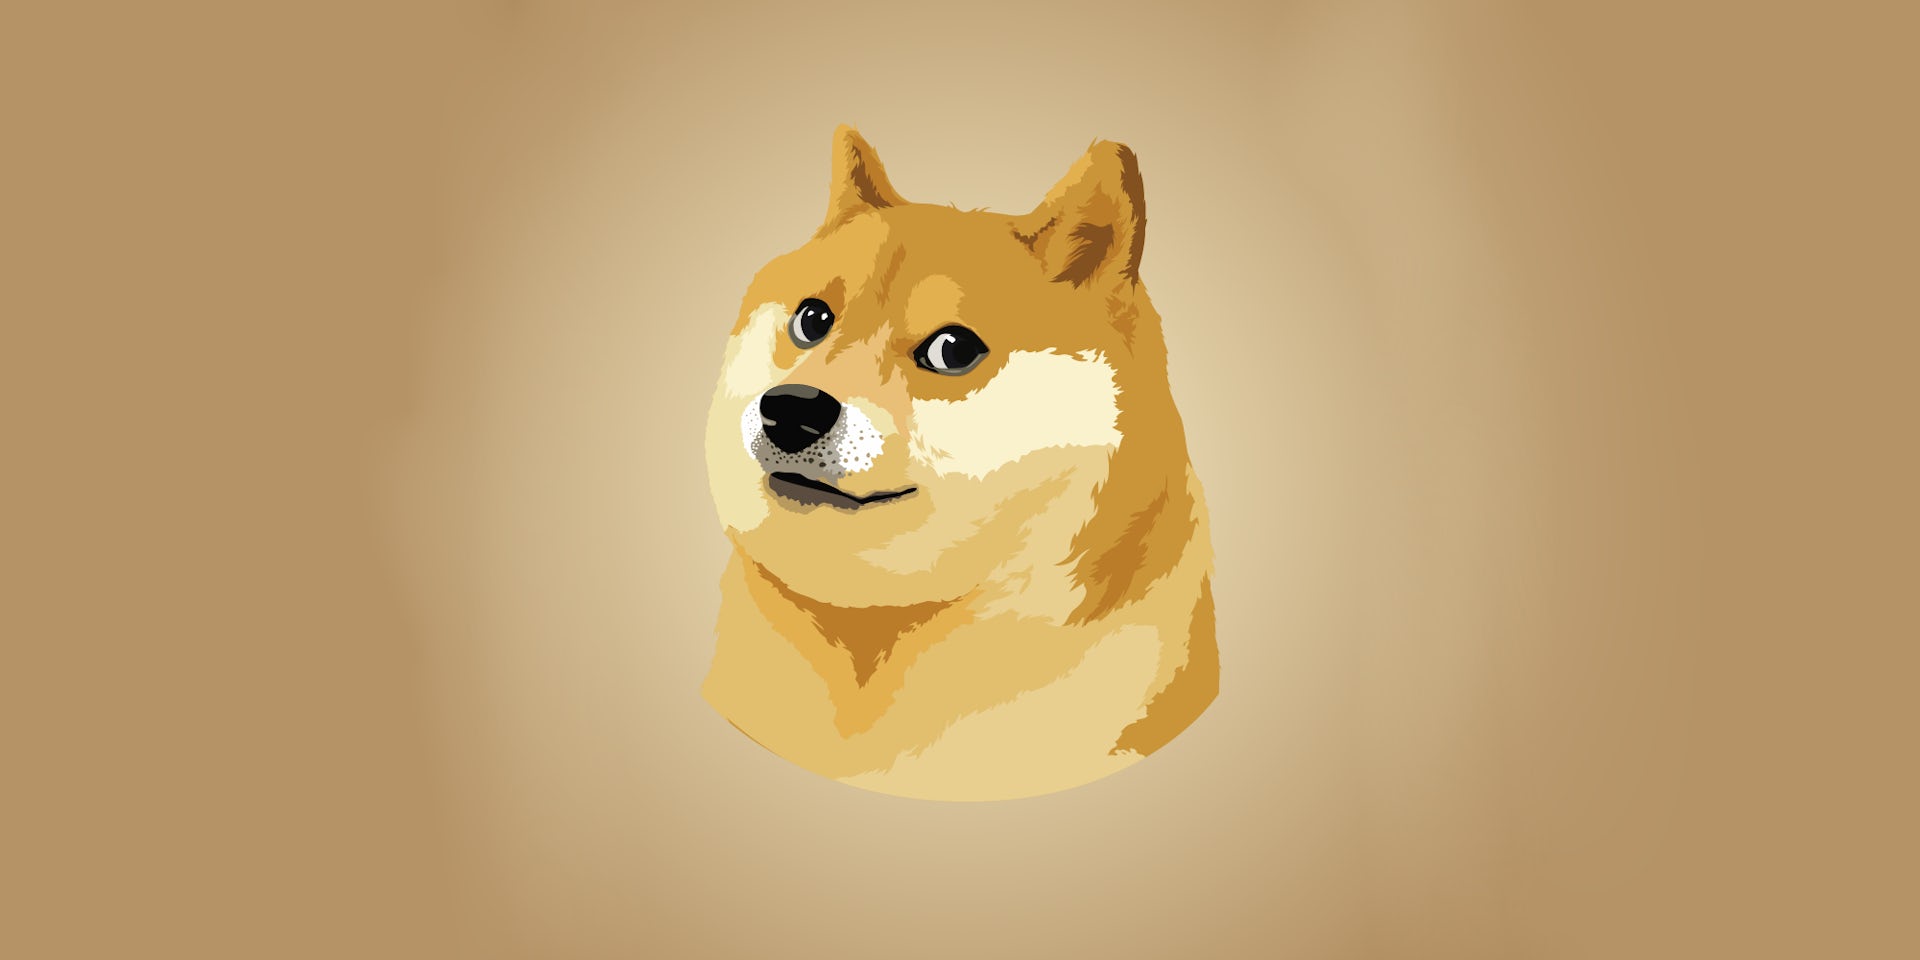 About Doge | Doge